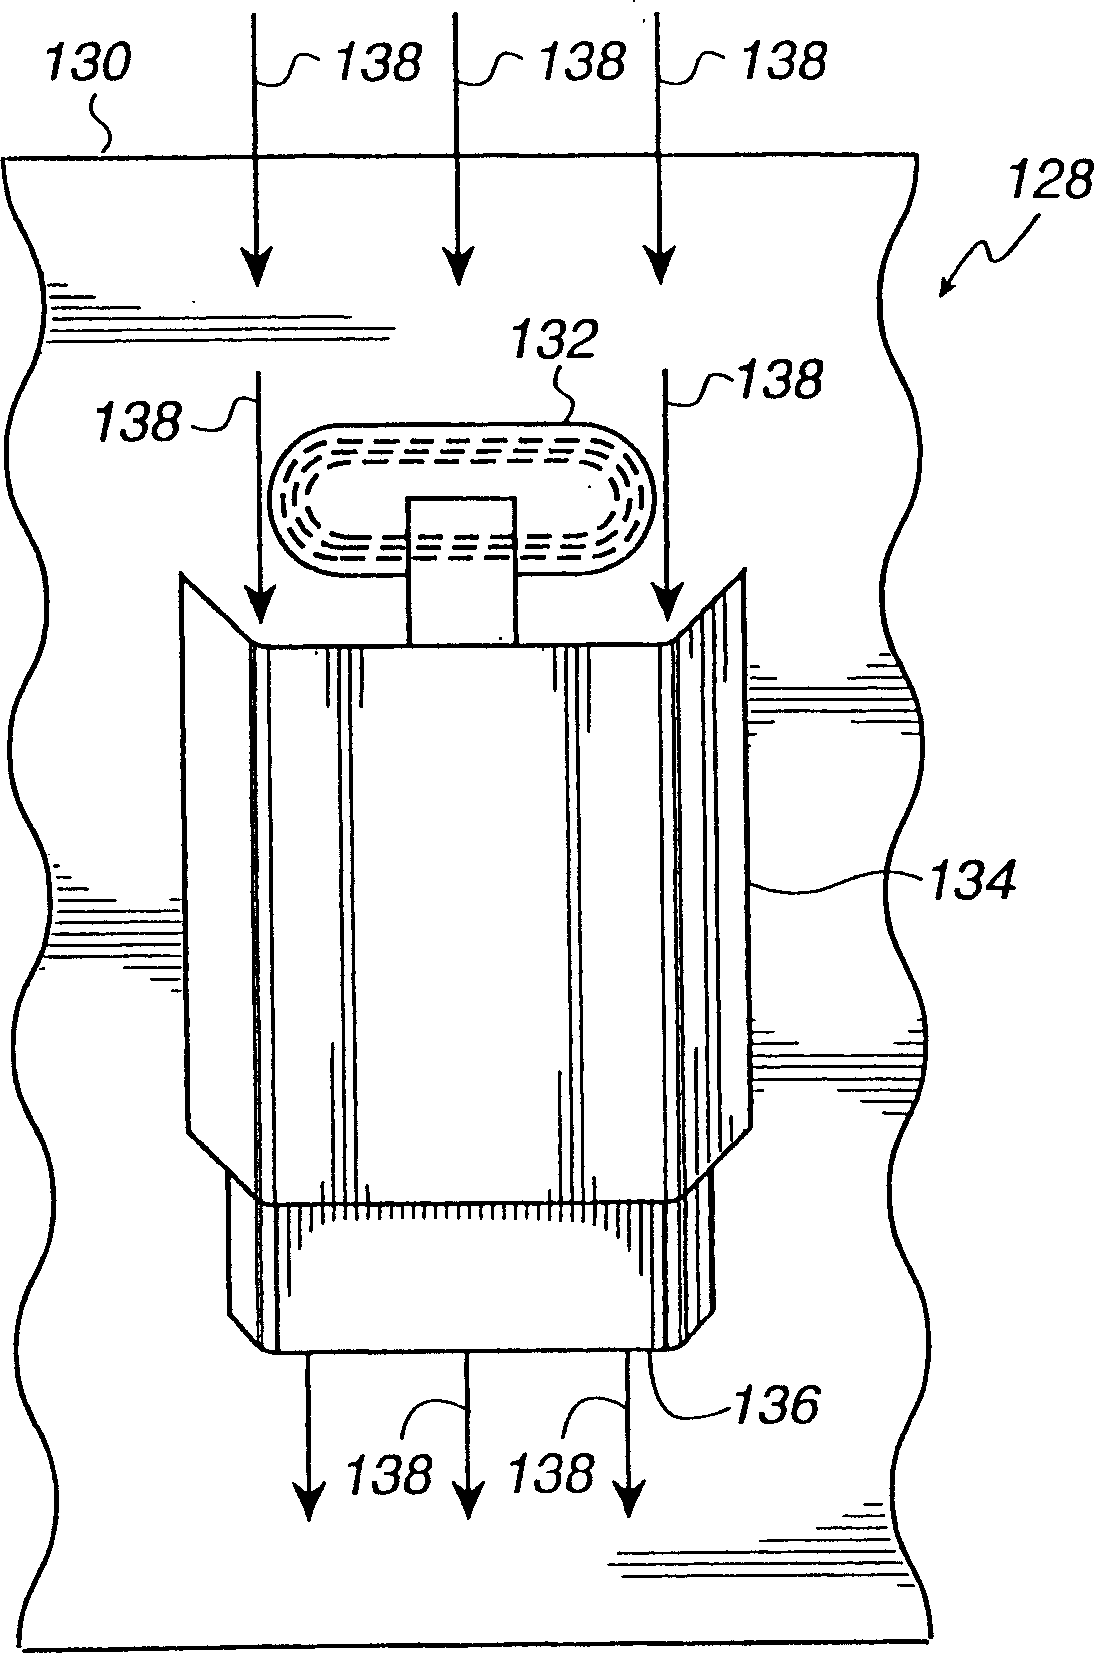 Method for creating ultra-clean mini-environment through localized air flow augentation